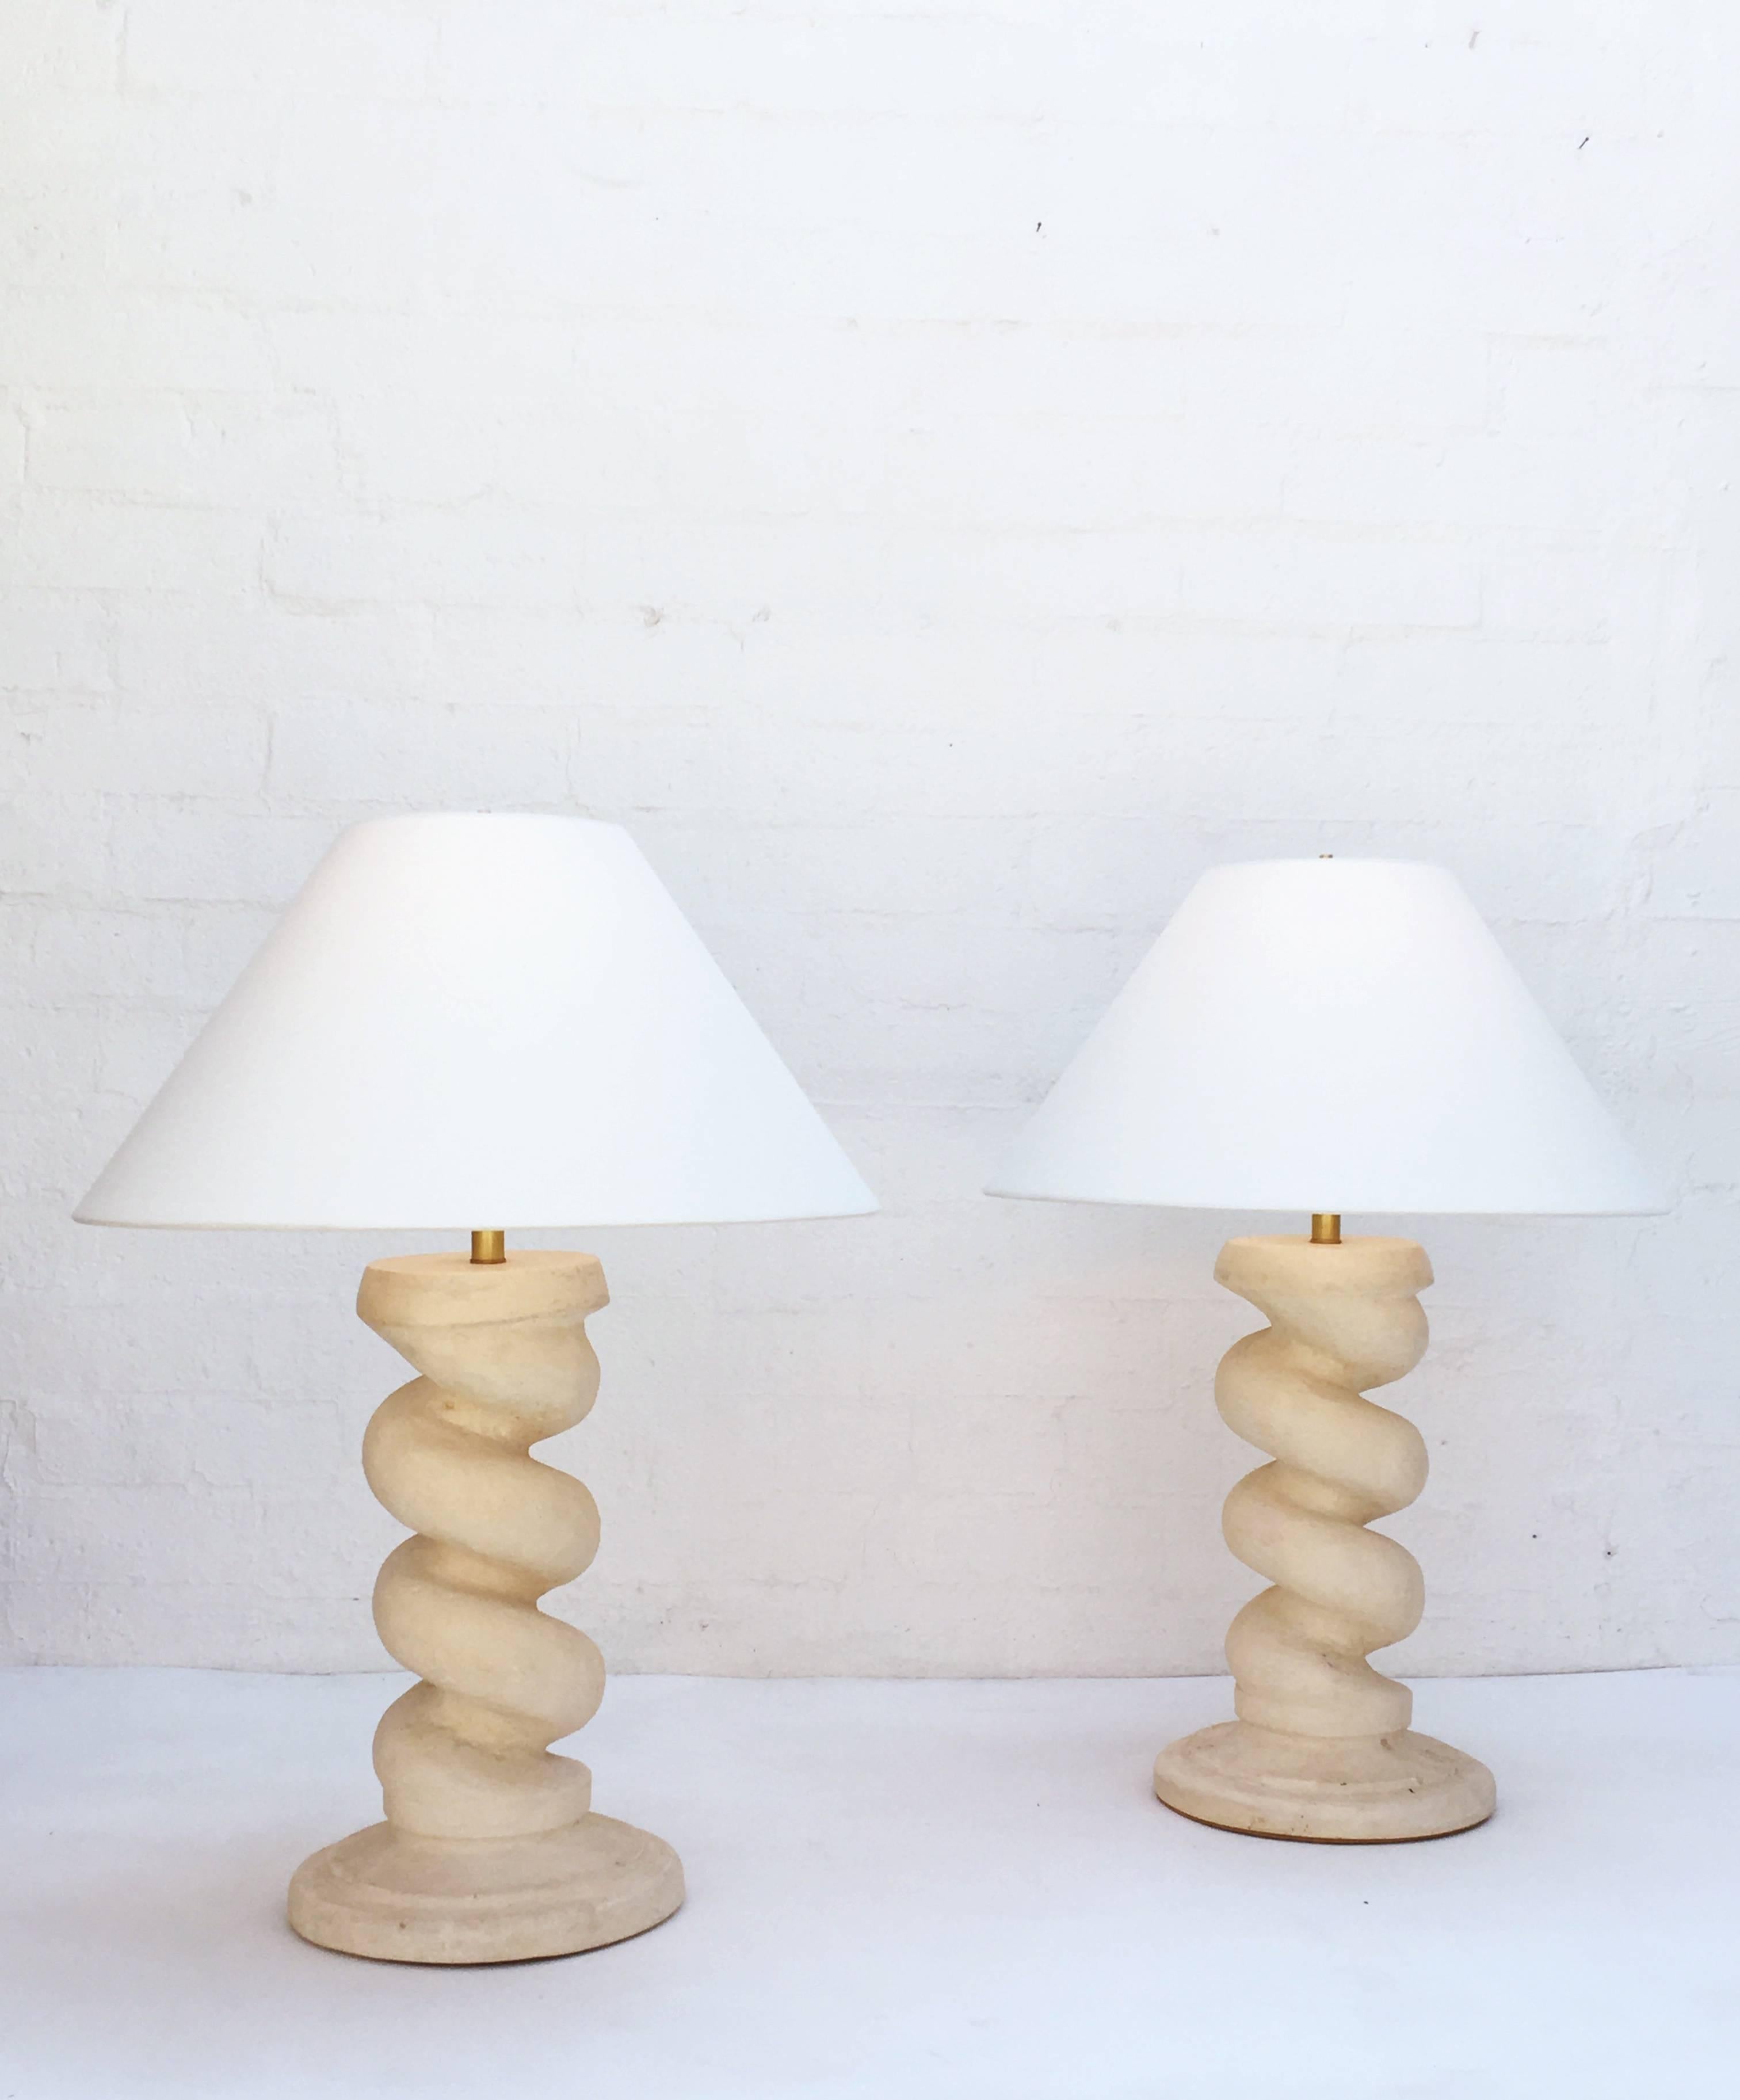 Beautiful heavy cast plaster spiral column table lamps designed in the 1960s by Michael Taylor. Newly rewired with brass hardware and new linen shades.
The base is 12